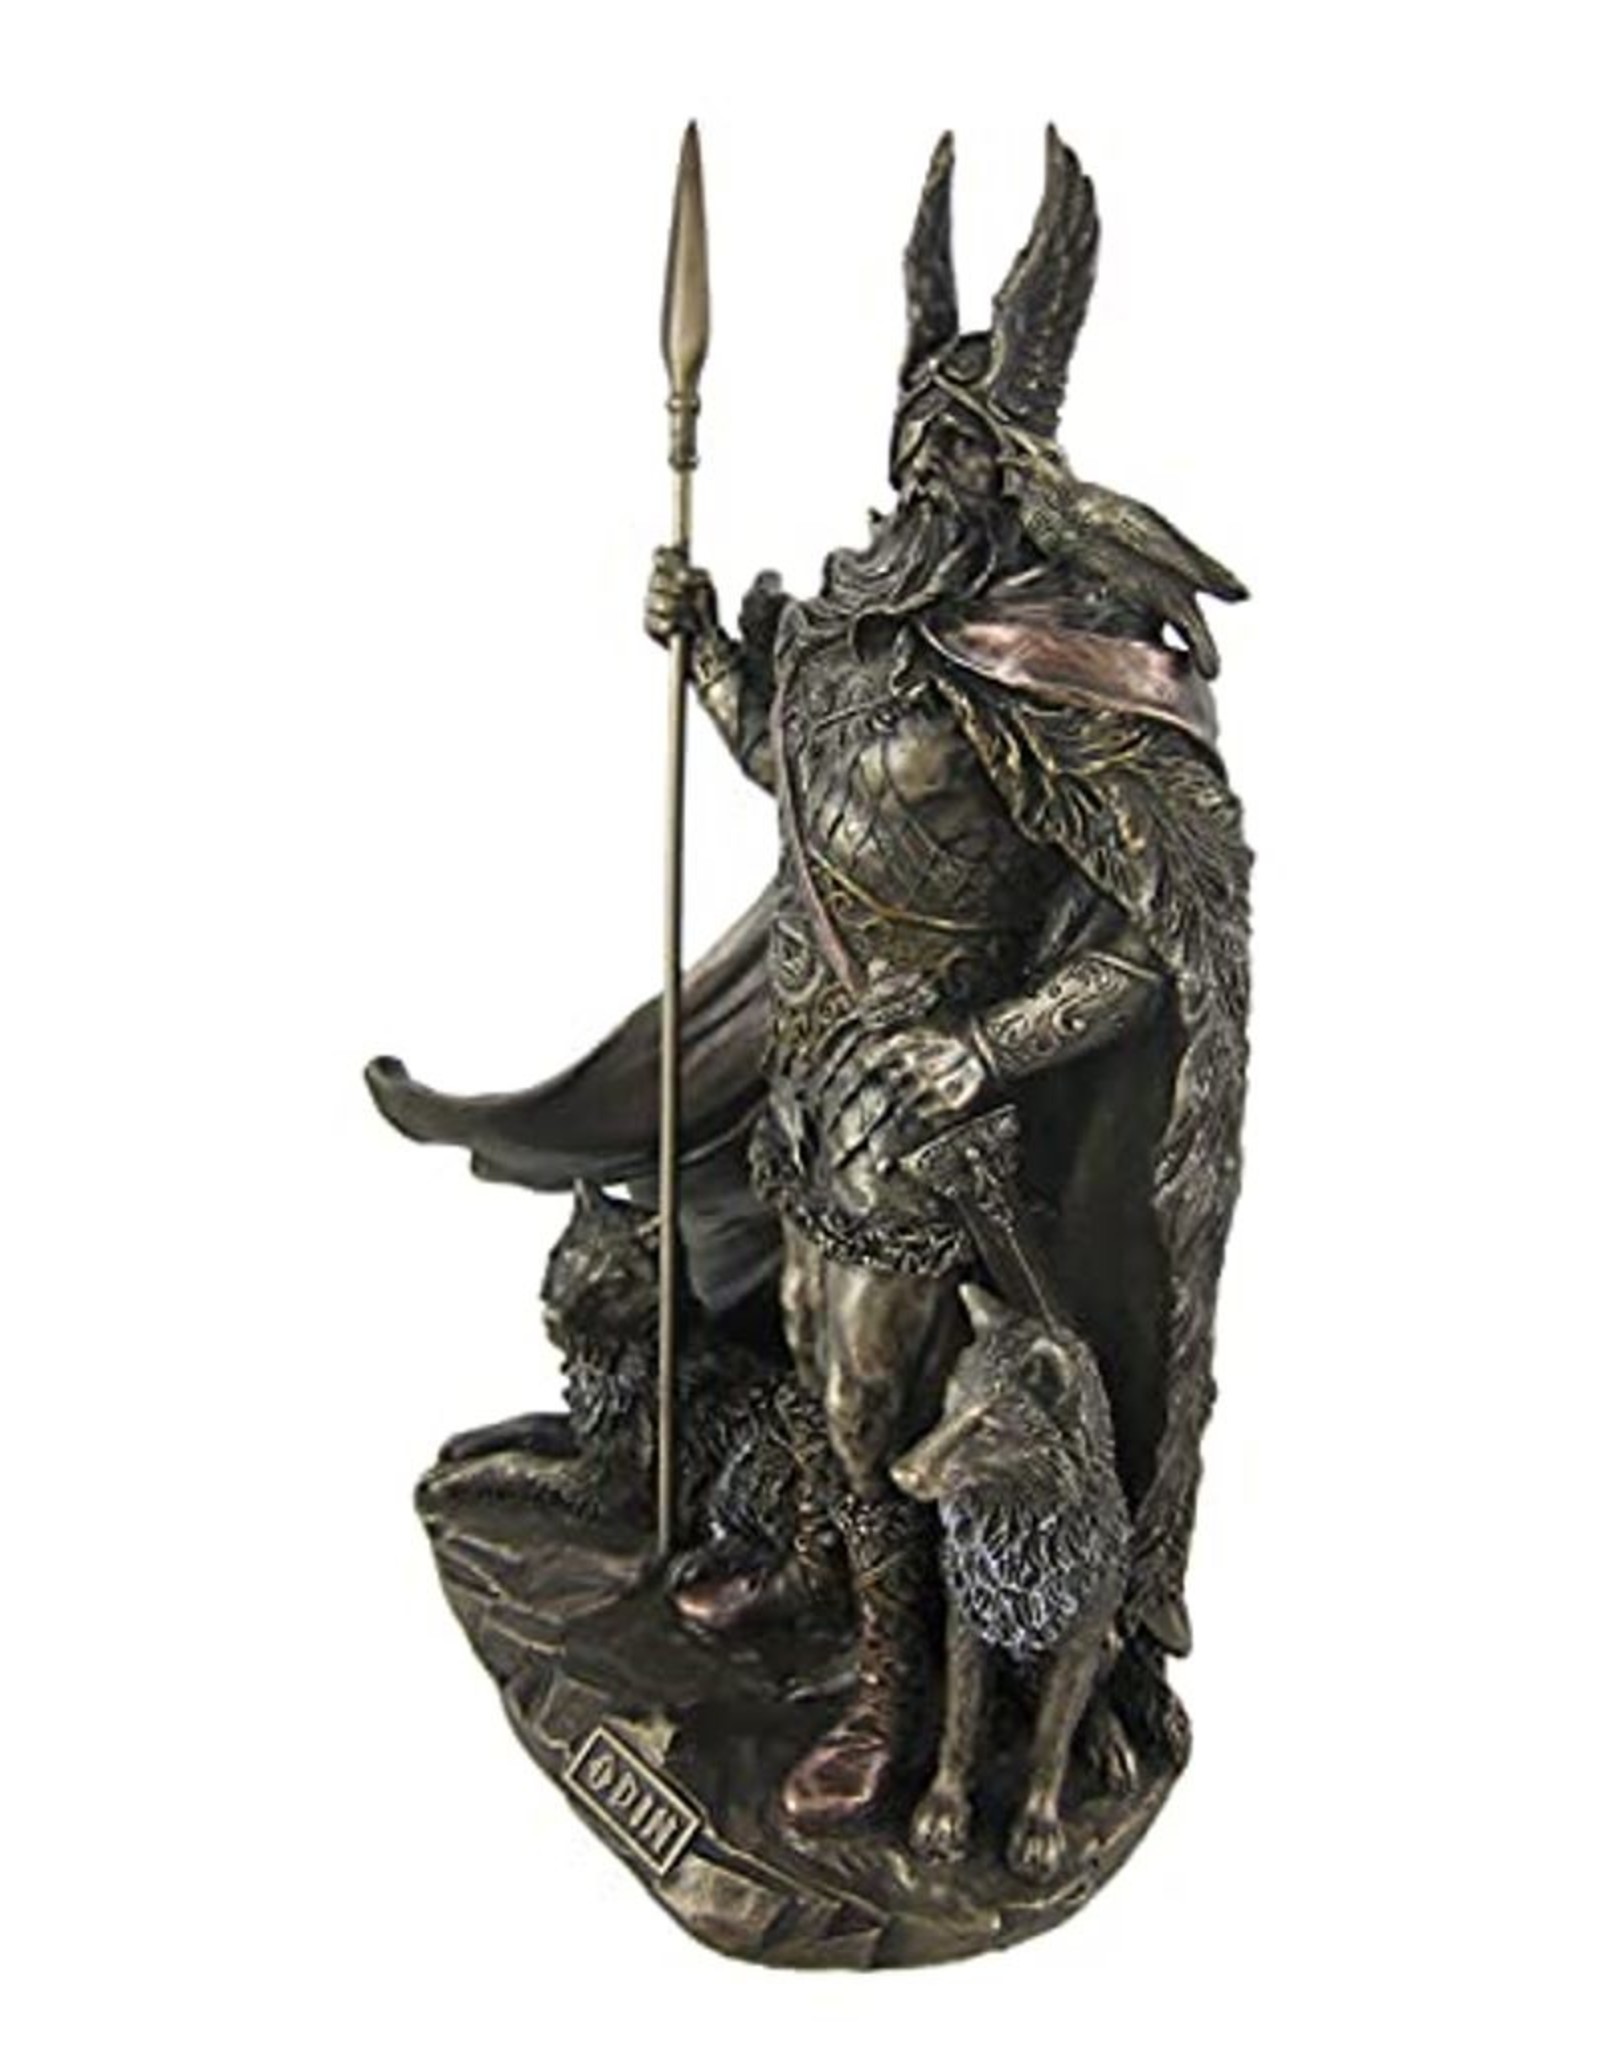 Veronese Design Giftware & Lifestyle - Odin Standing with Wolves and Crows bronzed statue 25cm